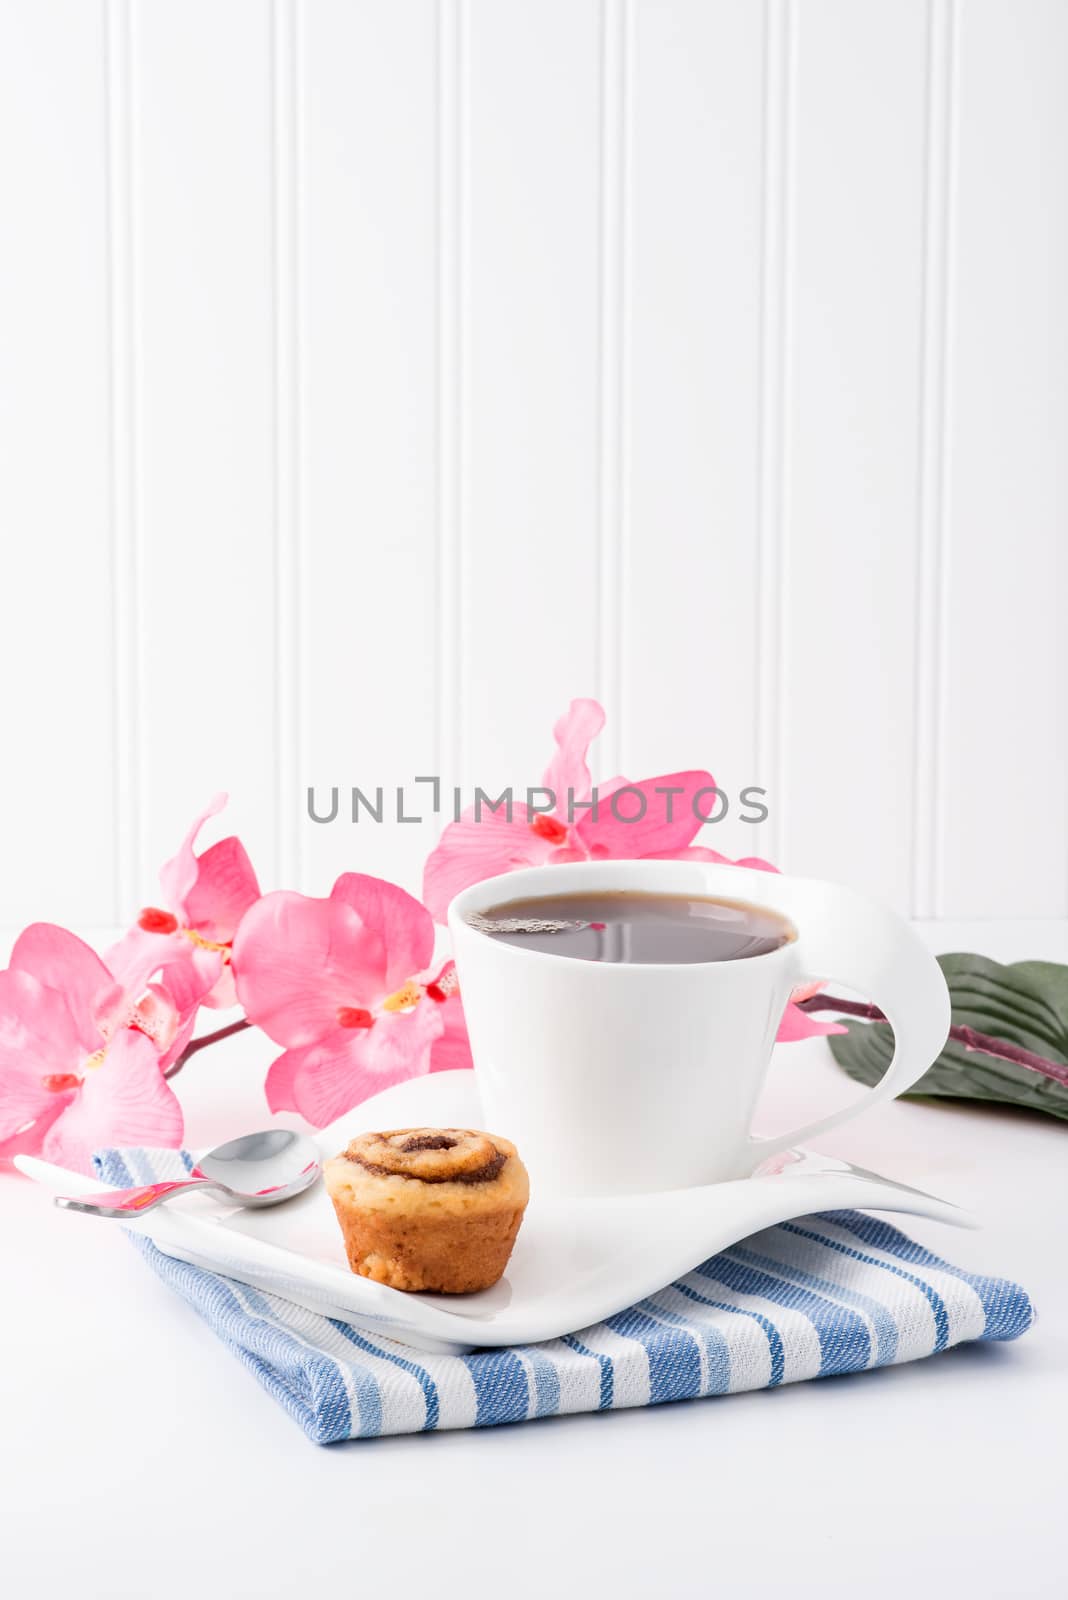 Mini cinnamon roll served with a cup of hot tea.